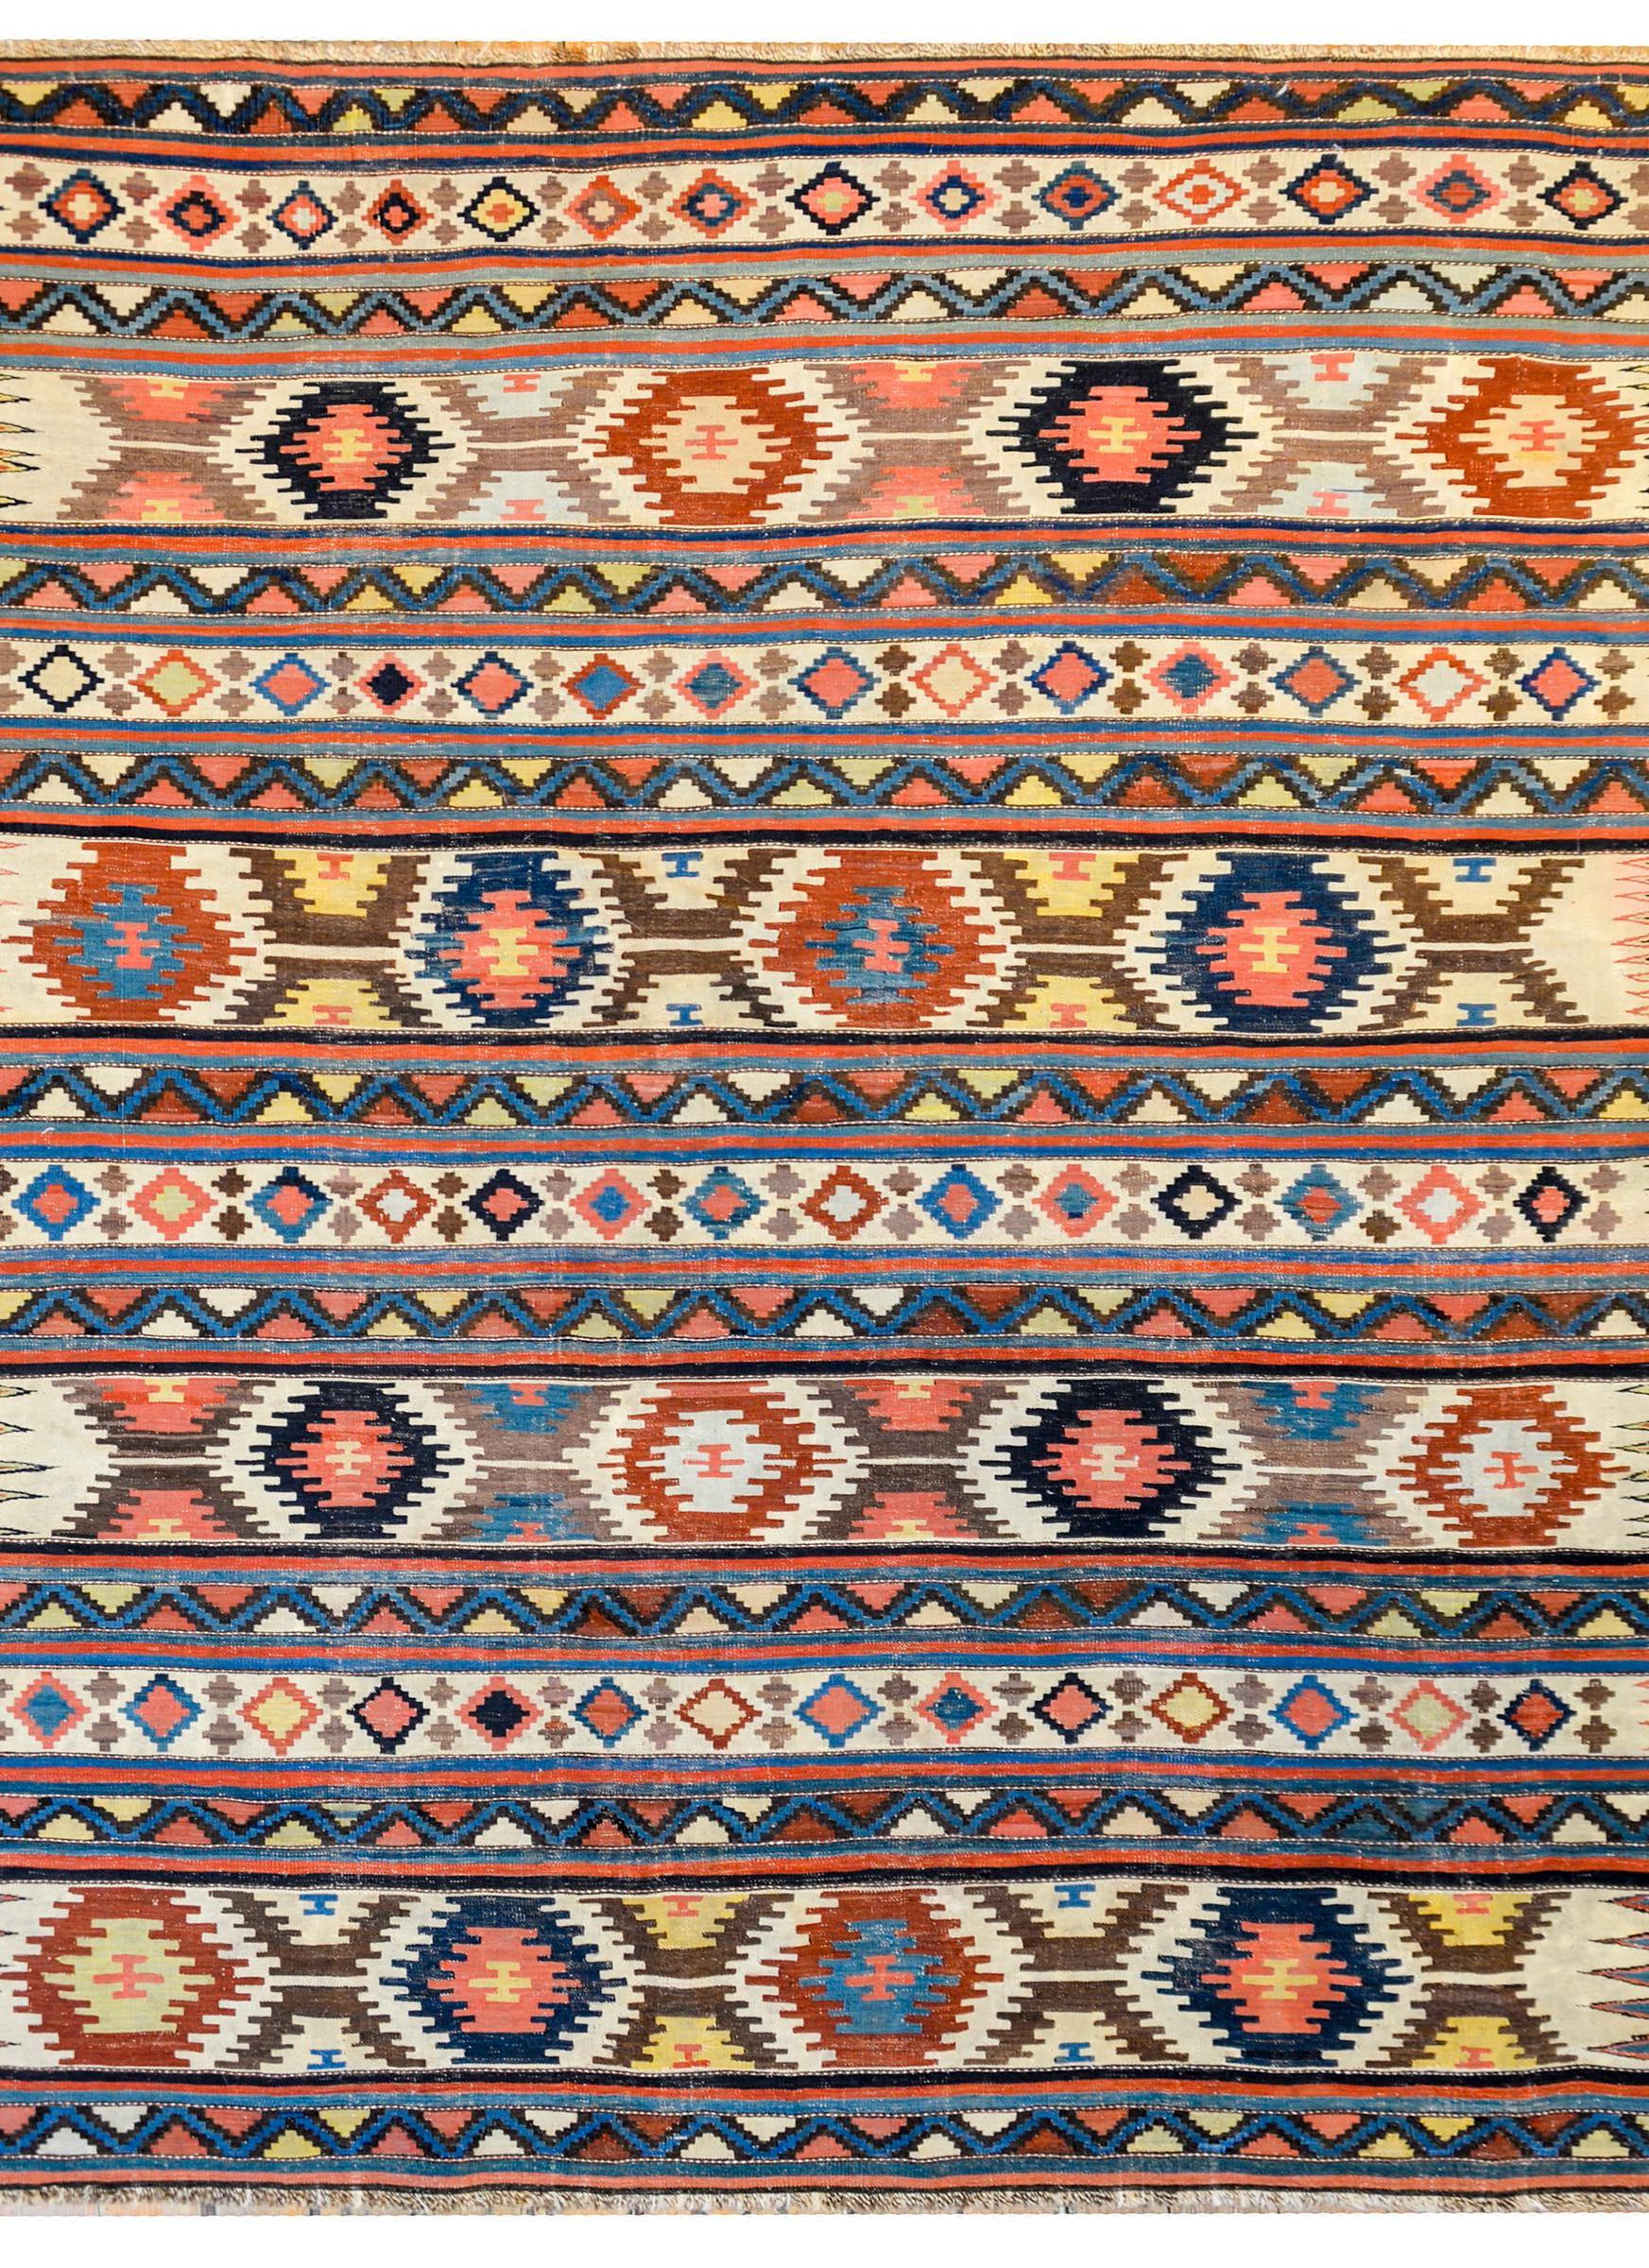 An extraordinary early 20th century Persian Shirvan kilim rug with myriad multicolored and geometric patterned stripes woven in indigo, crimson, gold, cream, coral, and brown vegetable dyed wool.